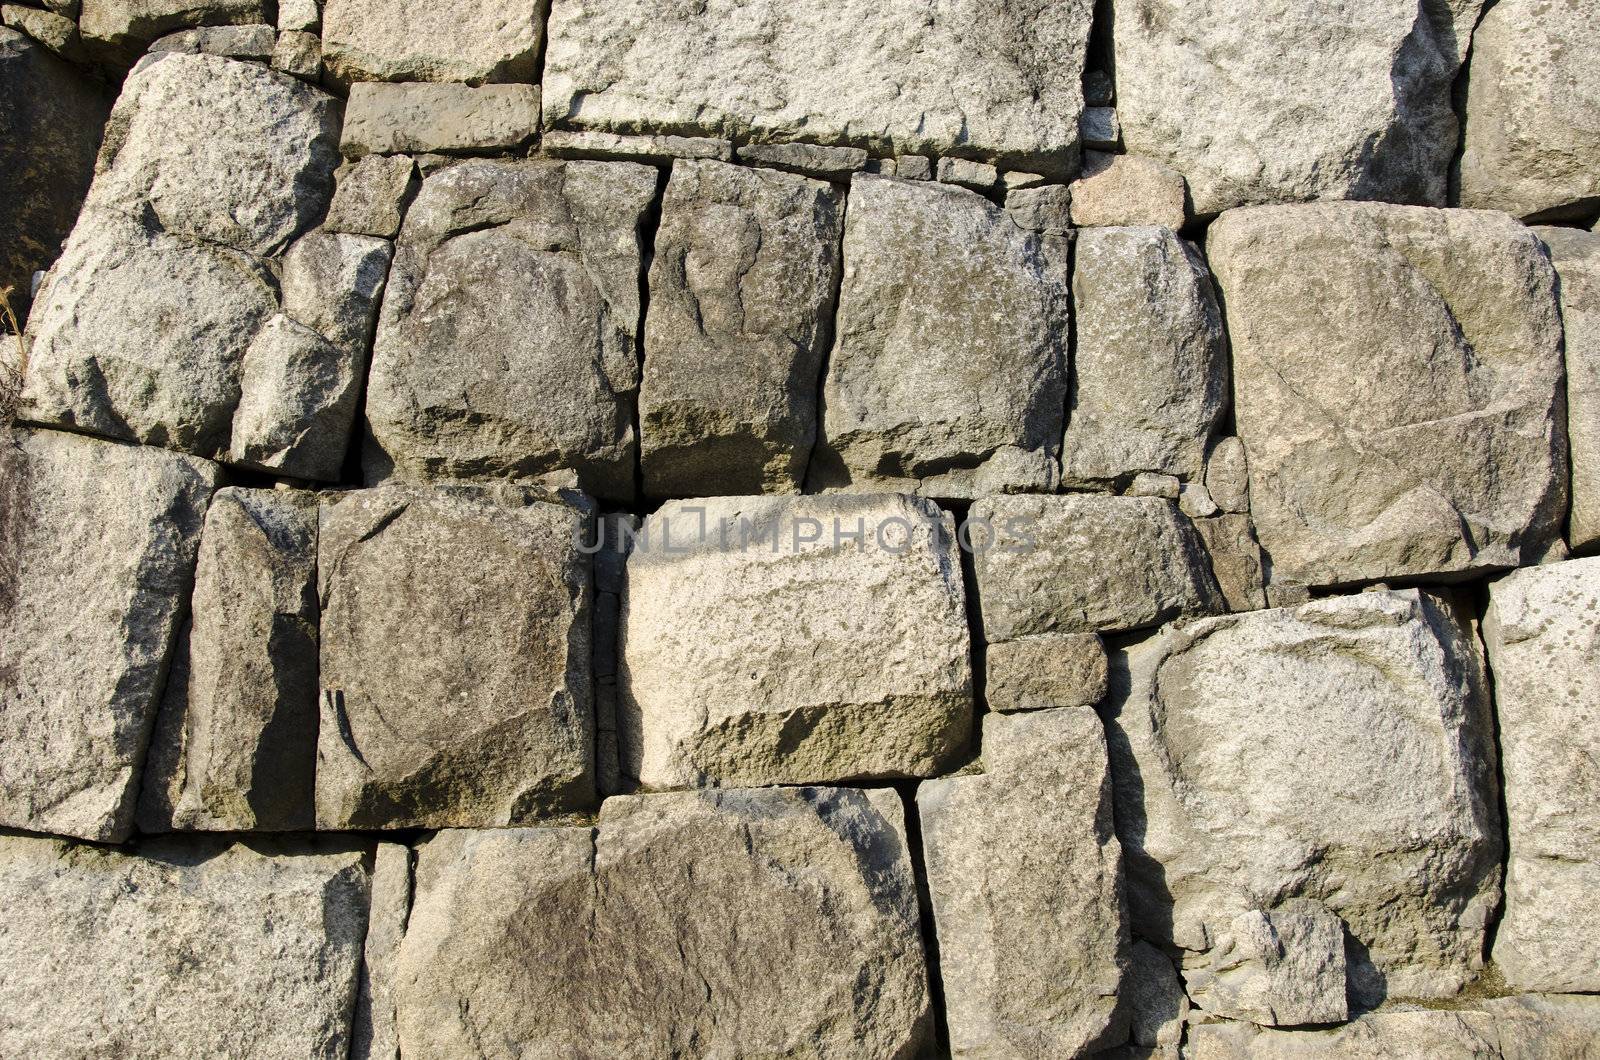 Background of a stone wall with big boulders